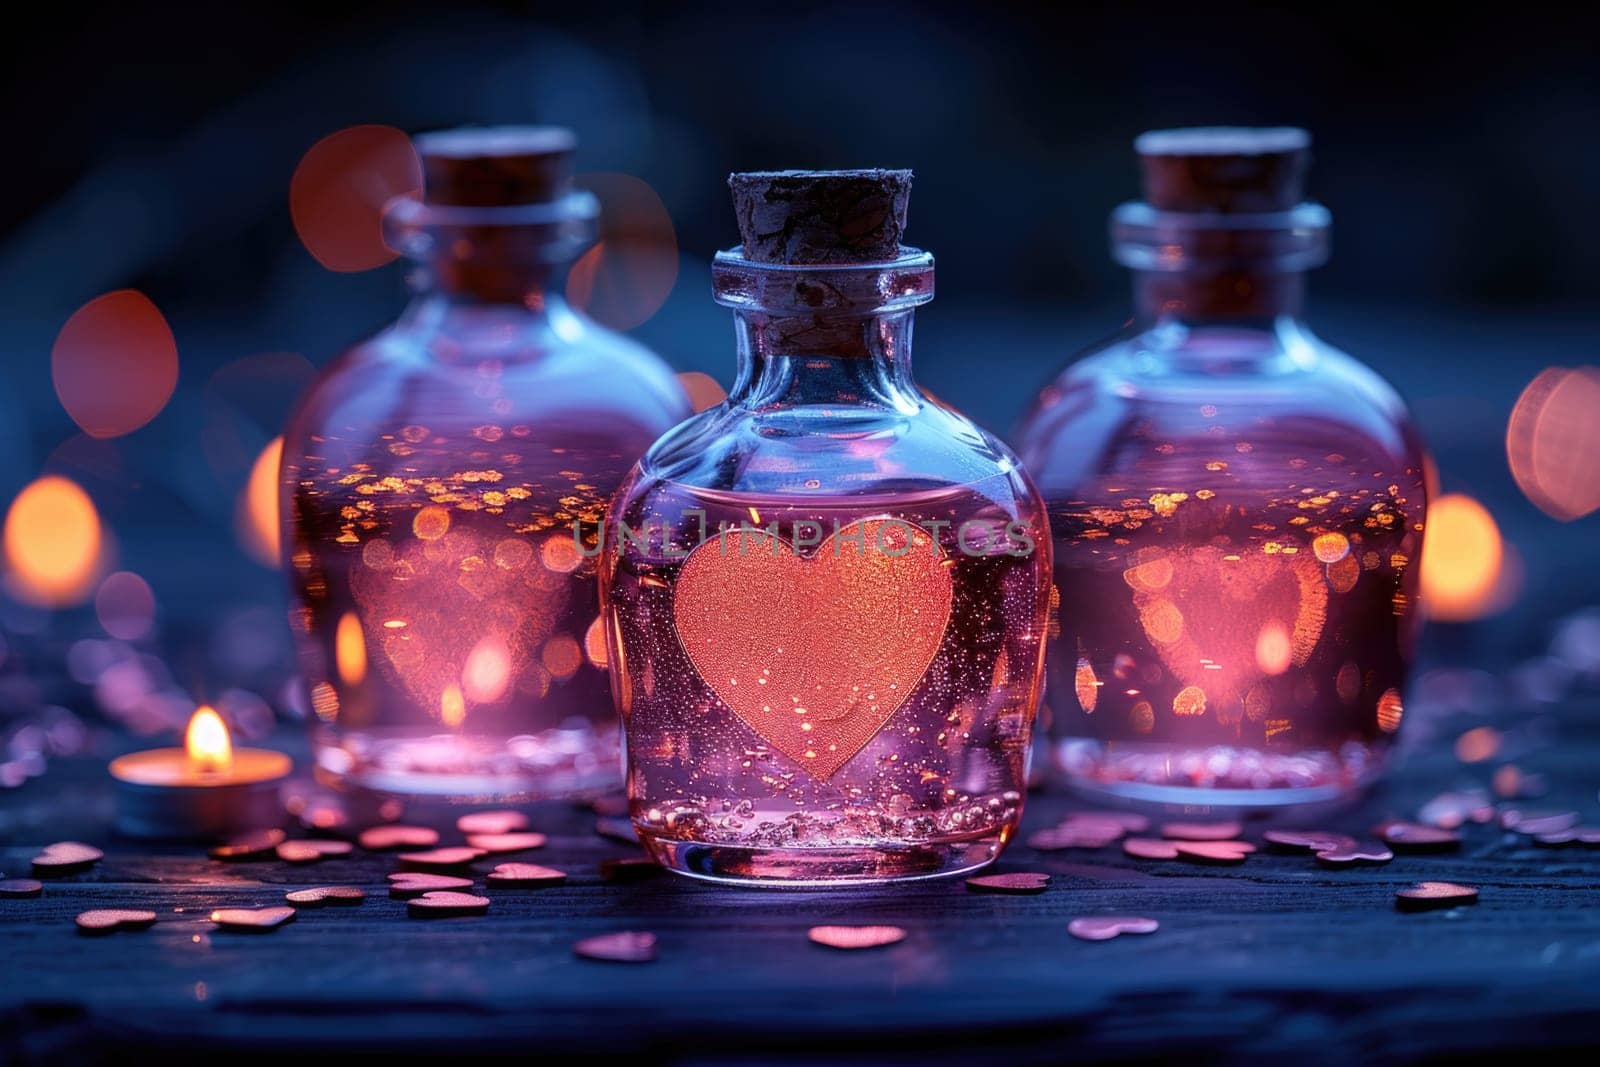 Enchanting Potion Bottles With Hearts by but_photo